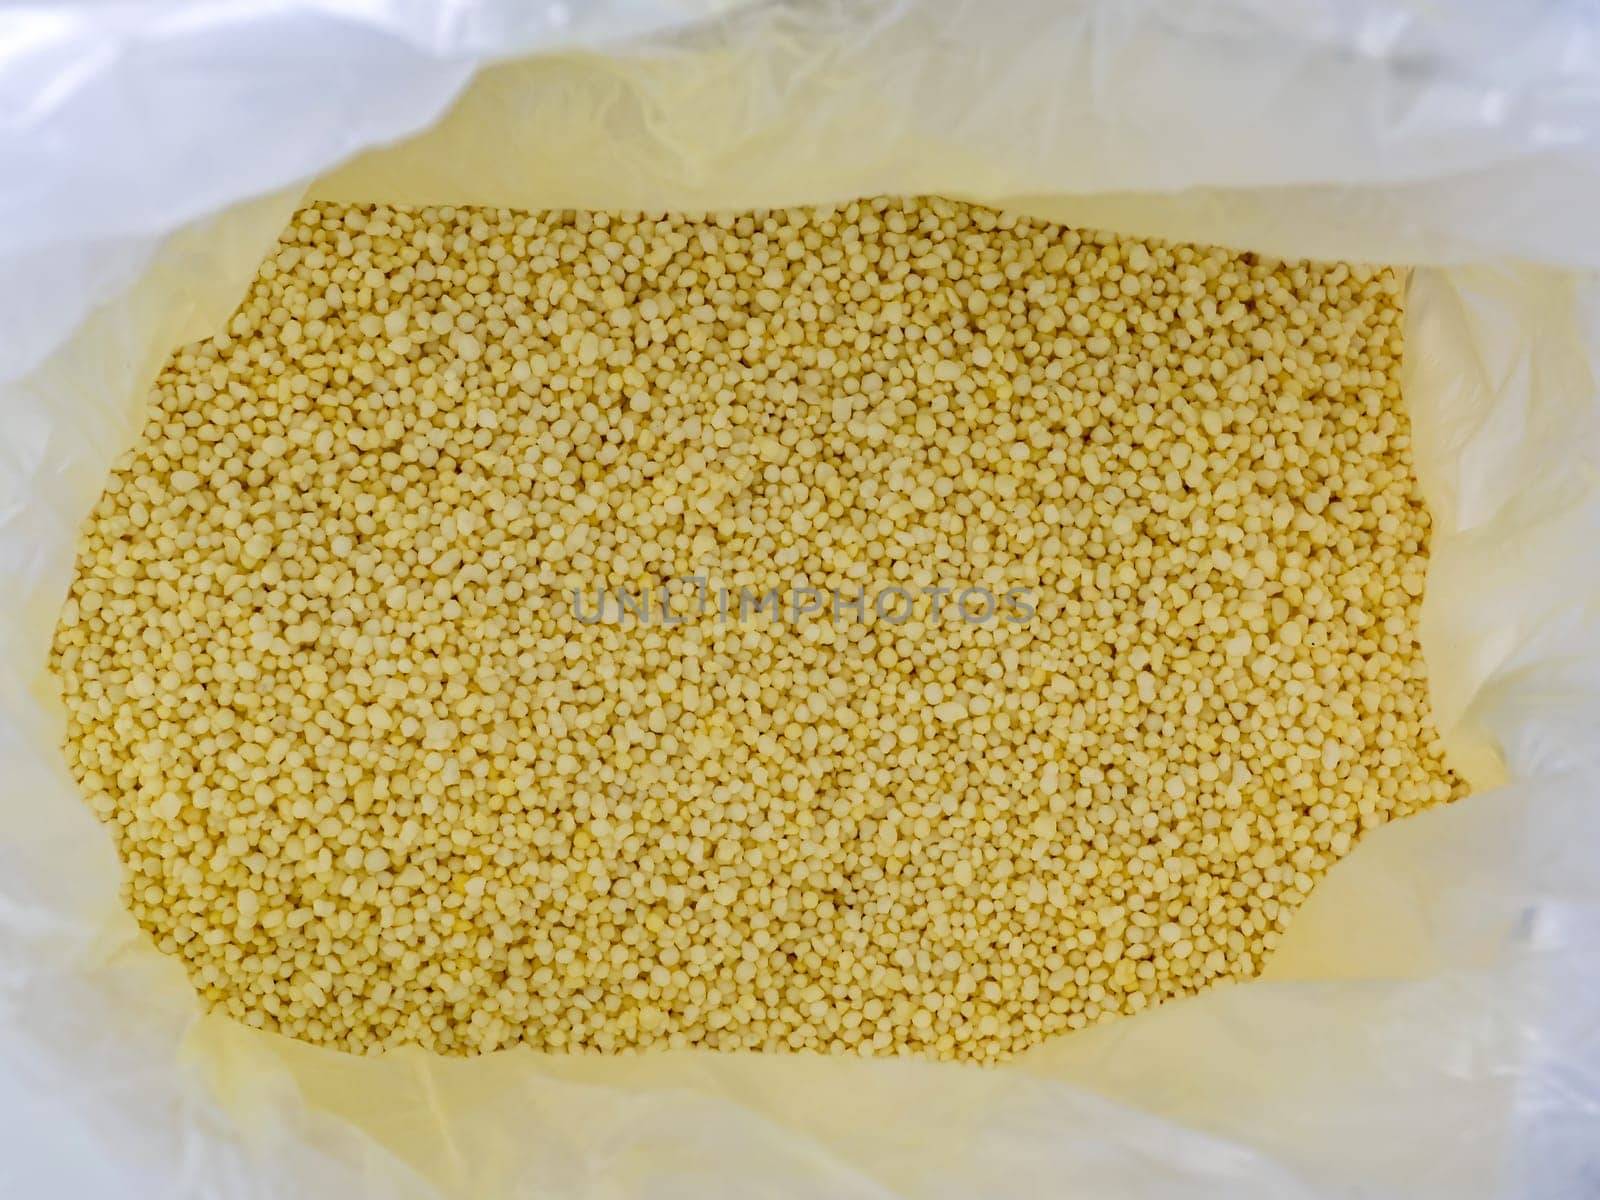 Light yellow small round granules are chemical fertilizers, calcium nitrate by Satakorn